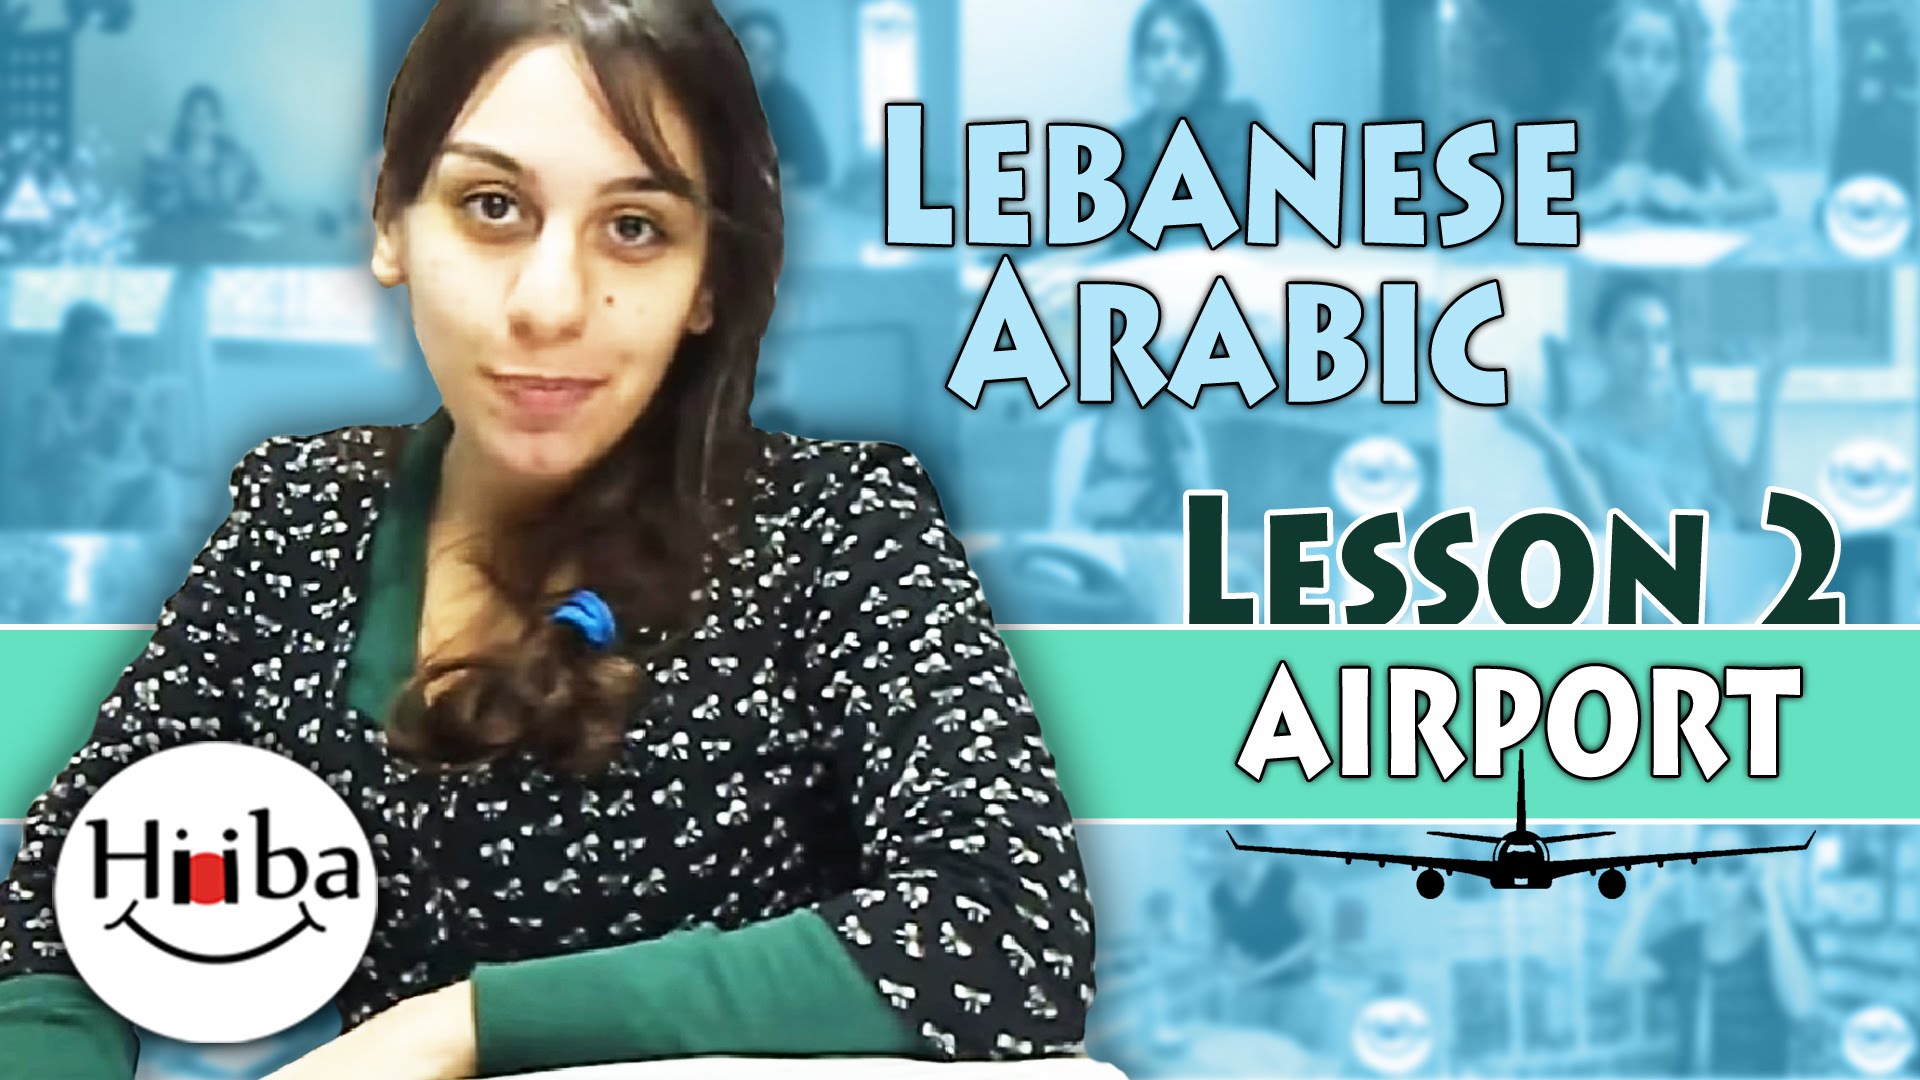 This image is the thumbnail of the Lebanese Lesson 2 (Airport). It contains a picture of Hiba Najem and the title